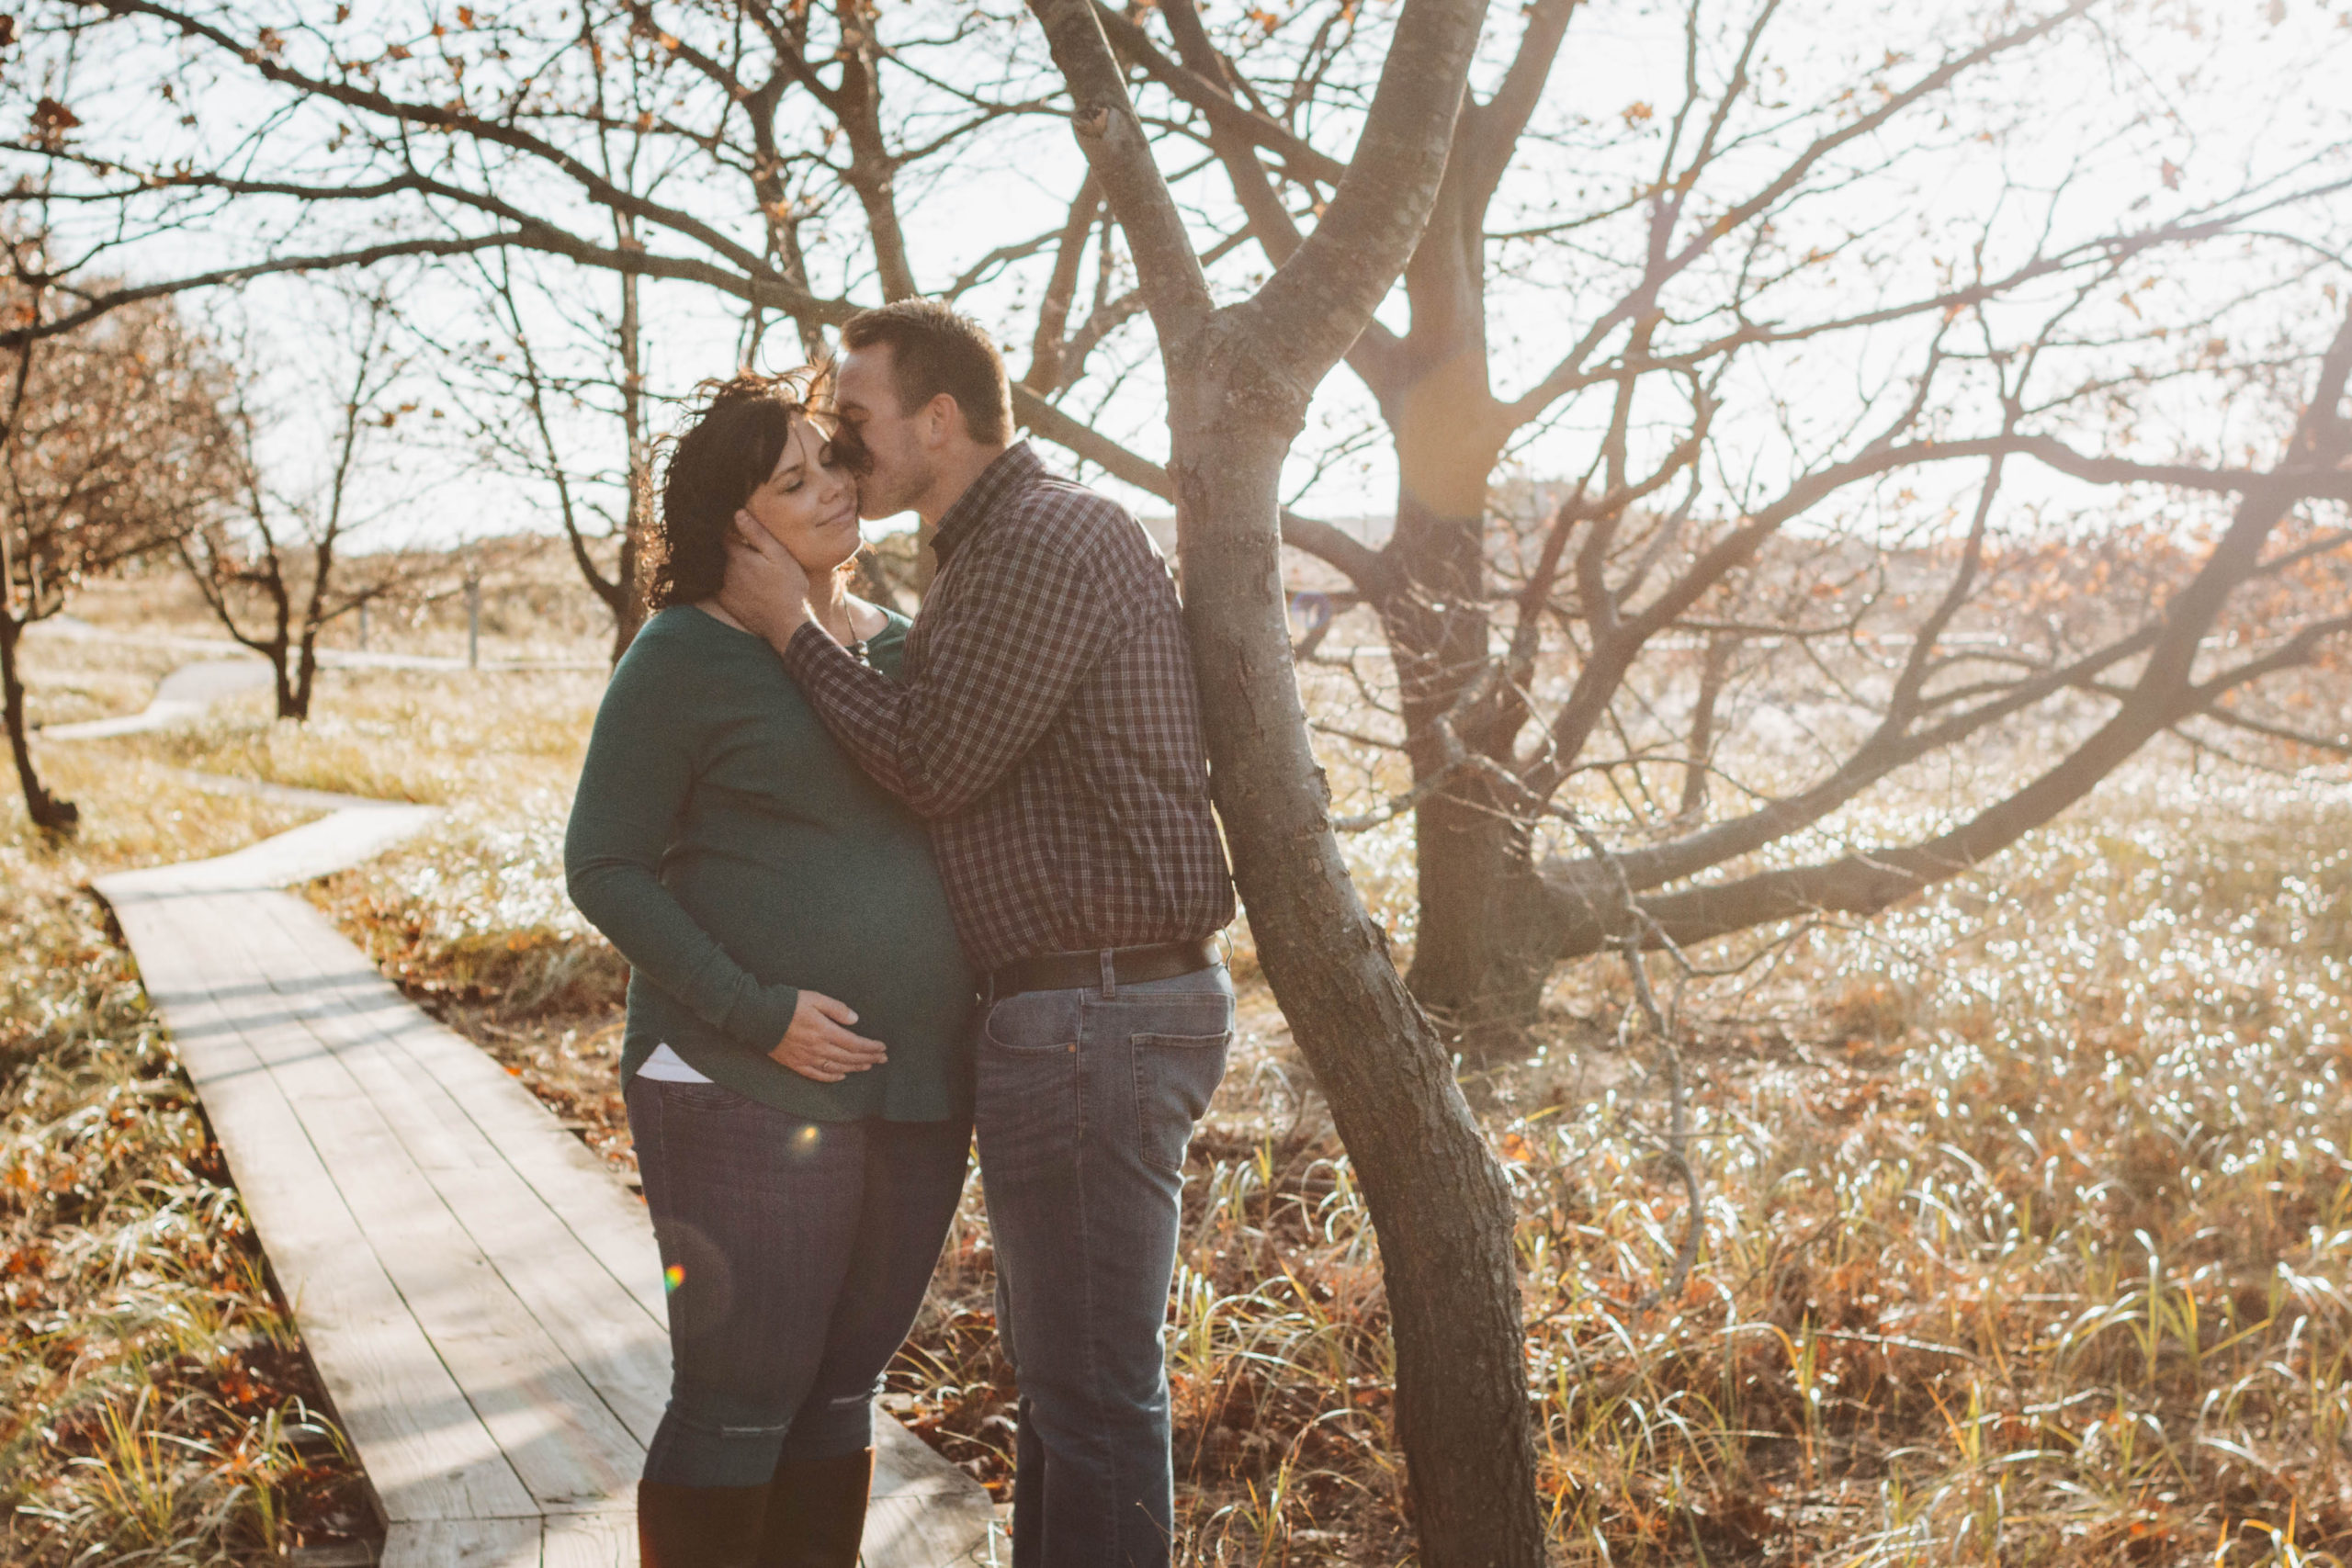 Maternity photography at Rosy Mound Natural Area in Grand Haven, Michigan.